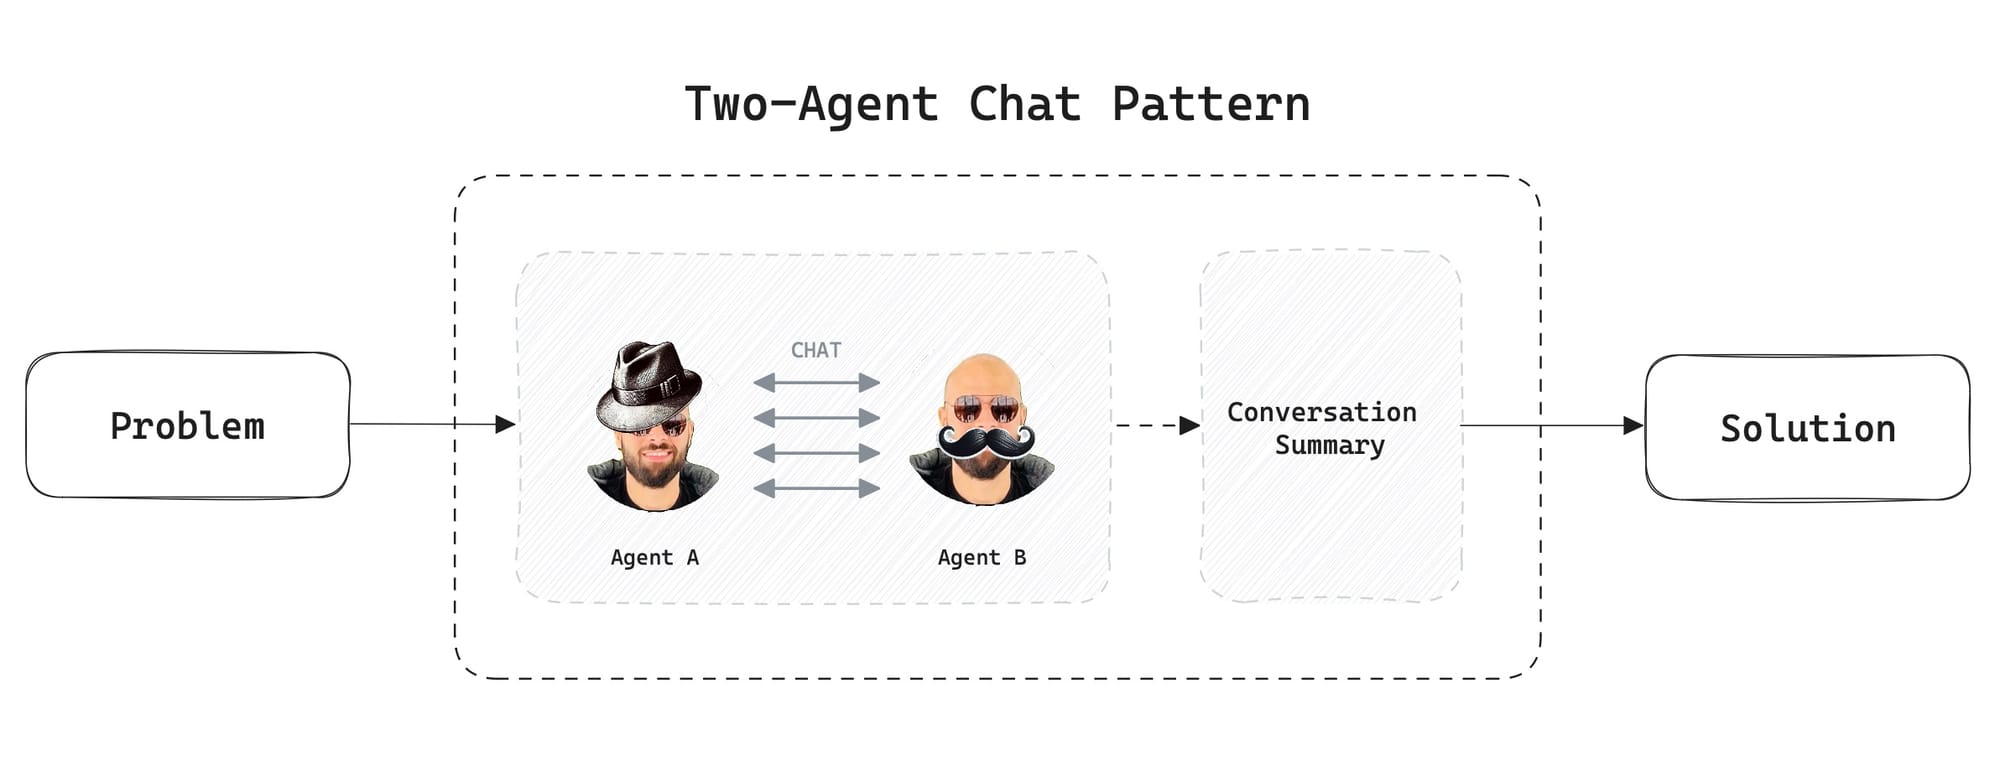 Two-agent Chat Pattern in AutoGen - Diagram